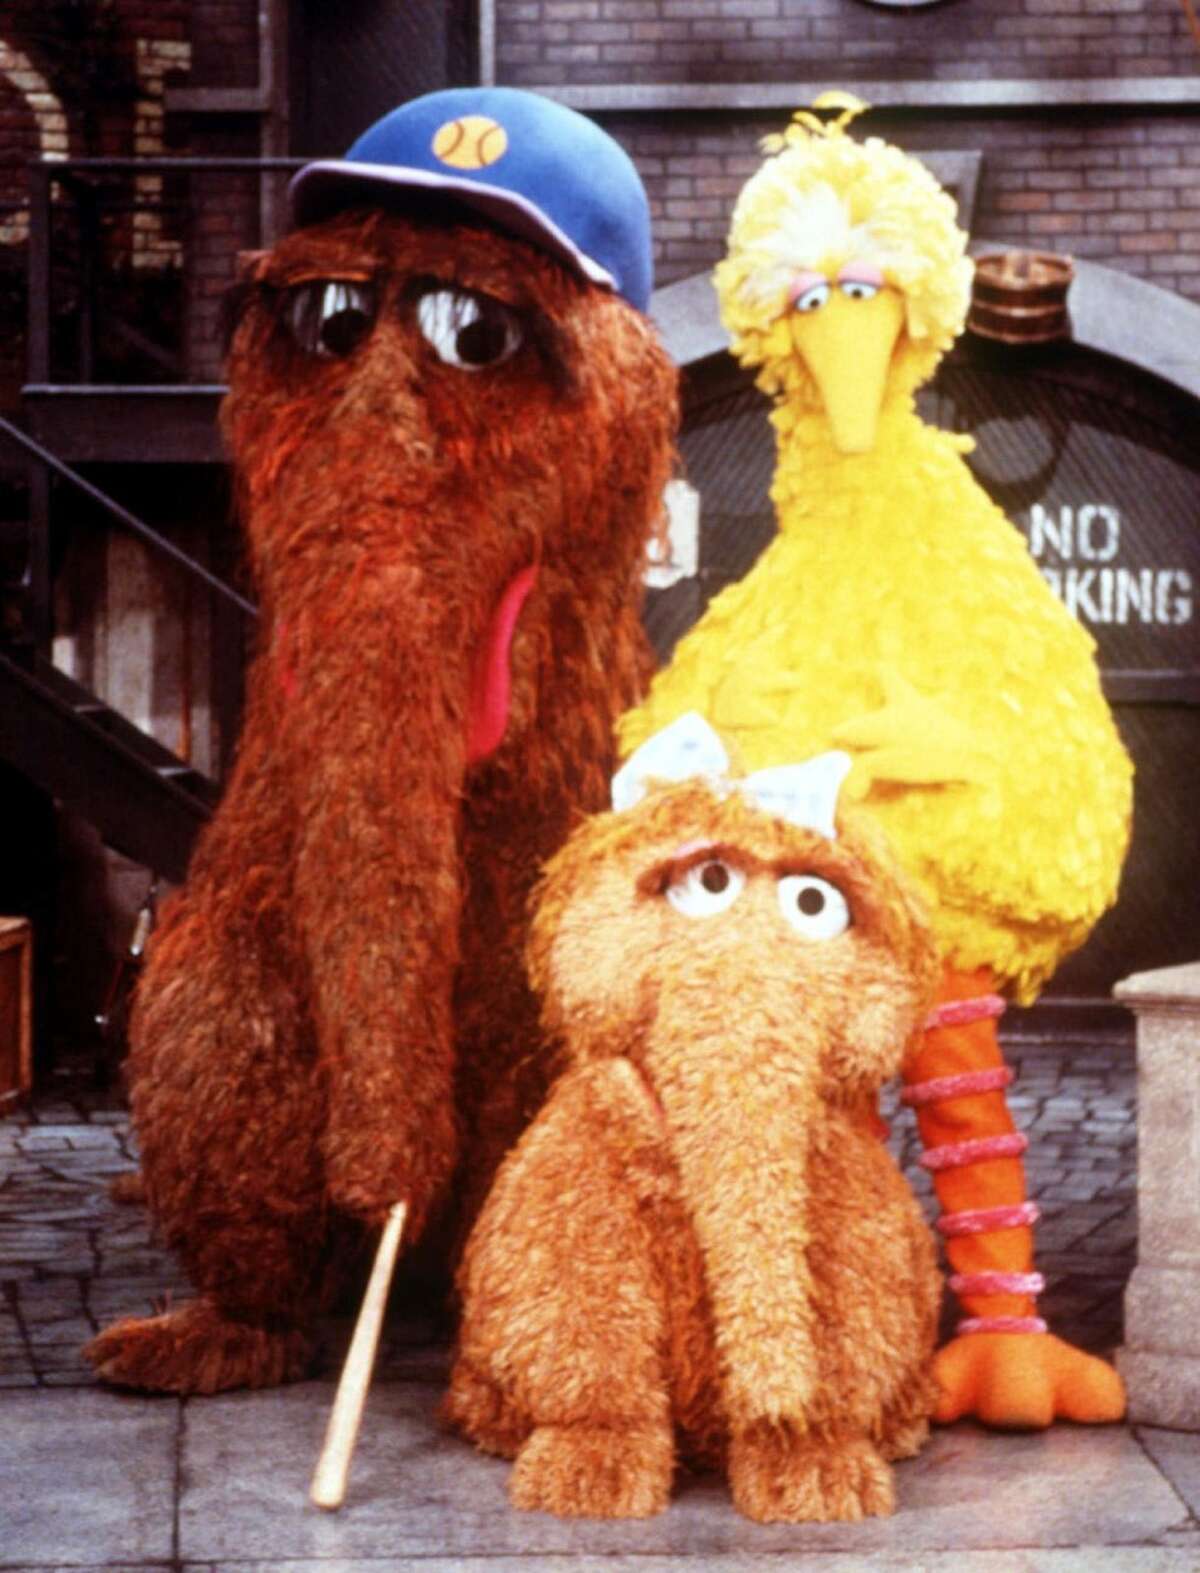 Snuffleupagus (left), was Big Bird's imaginary friend, whom grown-ups on the show never saw. But when child molestation became a bigger media issue in the '80s, ''Sesame Street'' decided to make Snuffy real. That was to encourage kids to confide in adults, even when they worried their story wouldn't be believed.